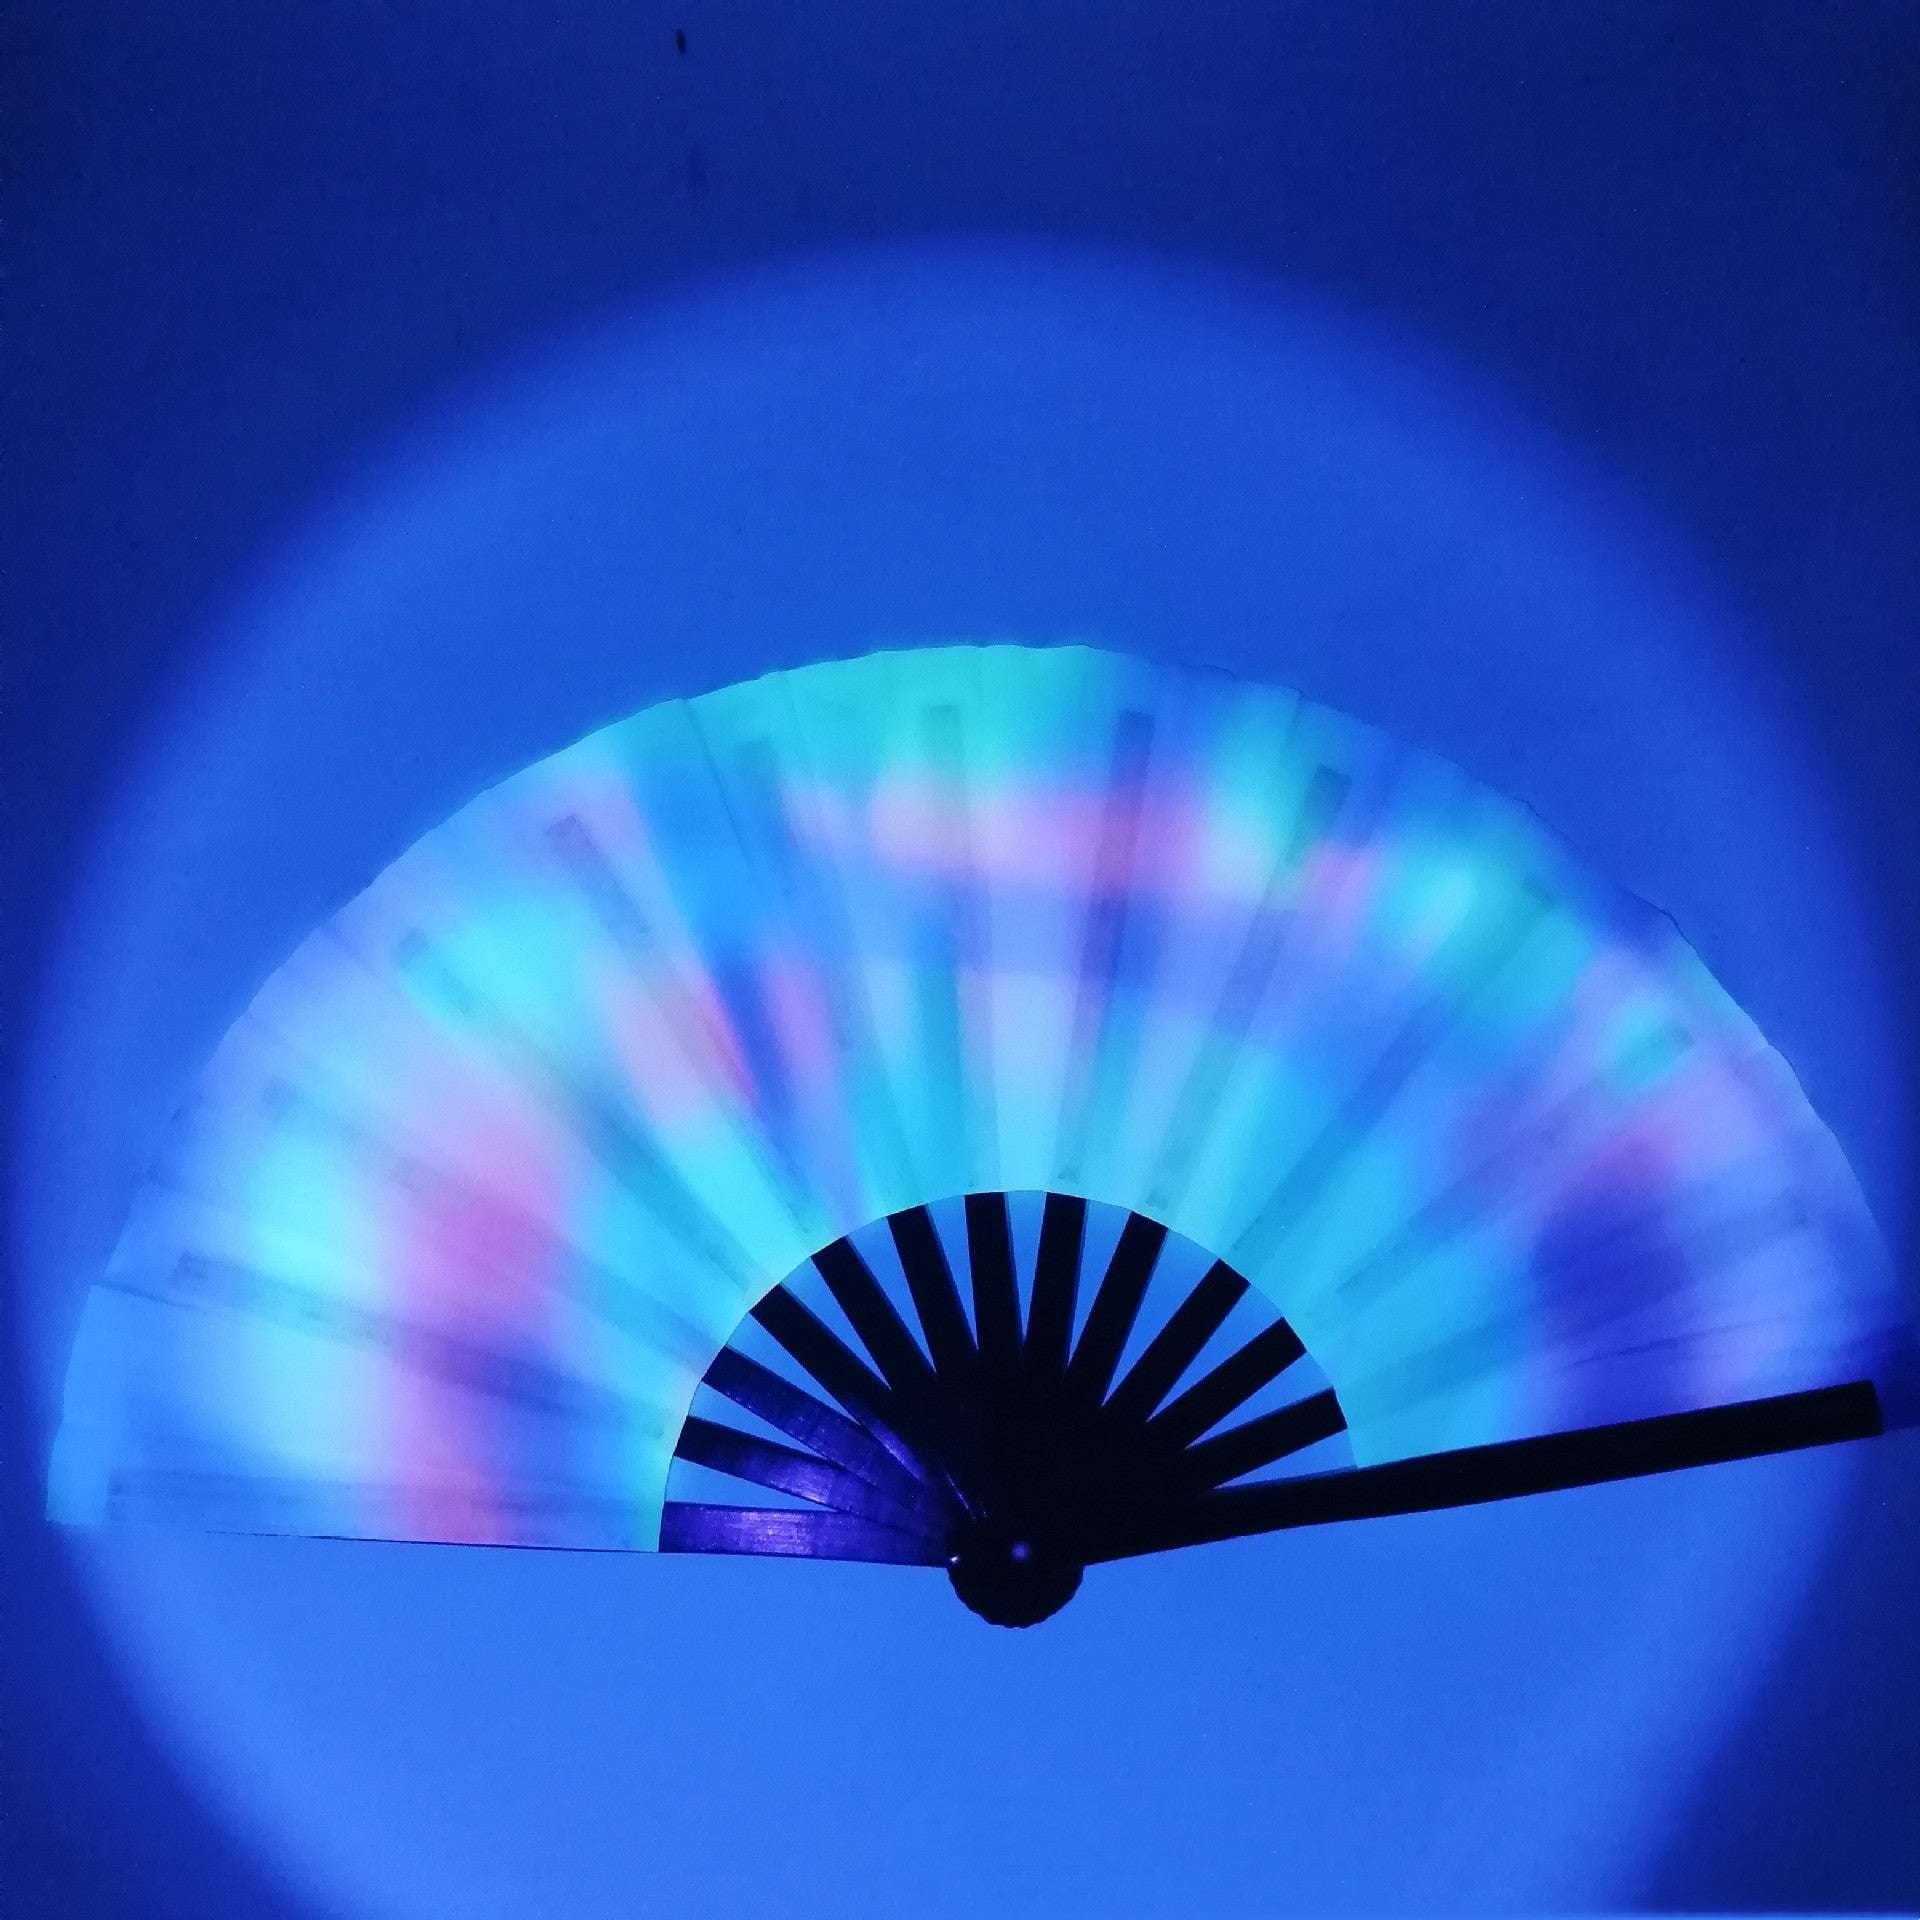 Bamboo Satin Fan, Elegant Party Accessory, UV Fluorescent Fan - available at Sparq Mart